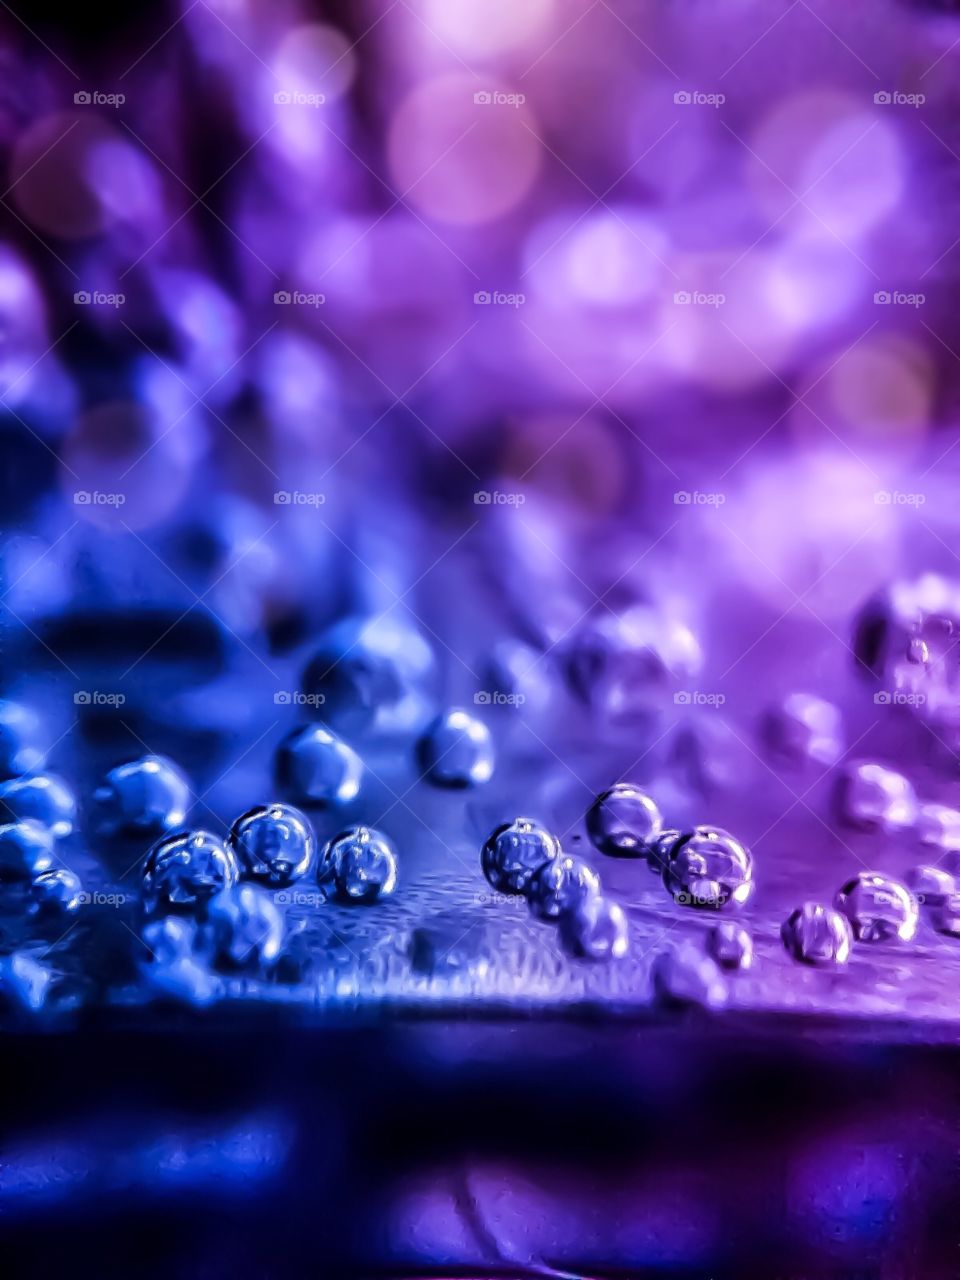 Bubbles on the blurred blue and purple background 